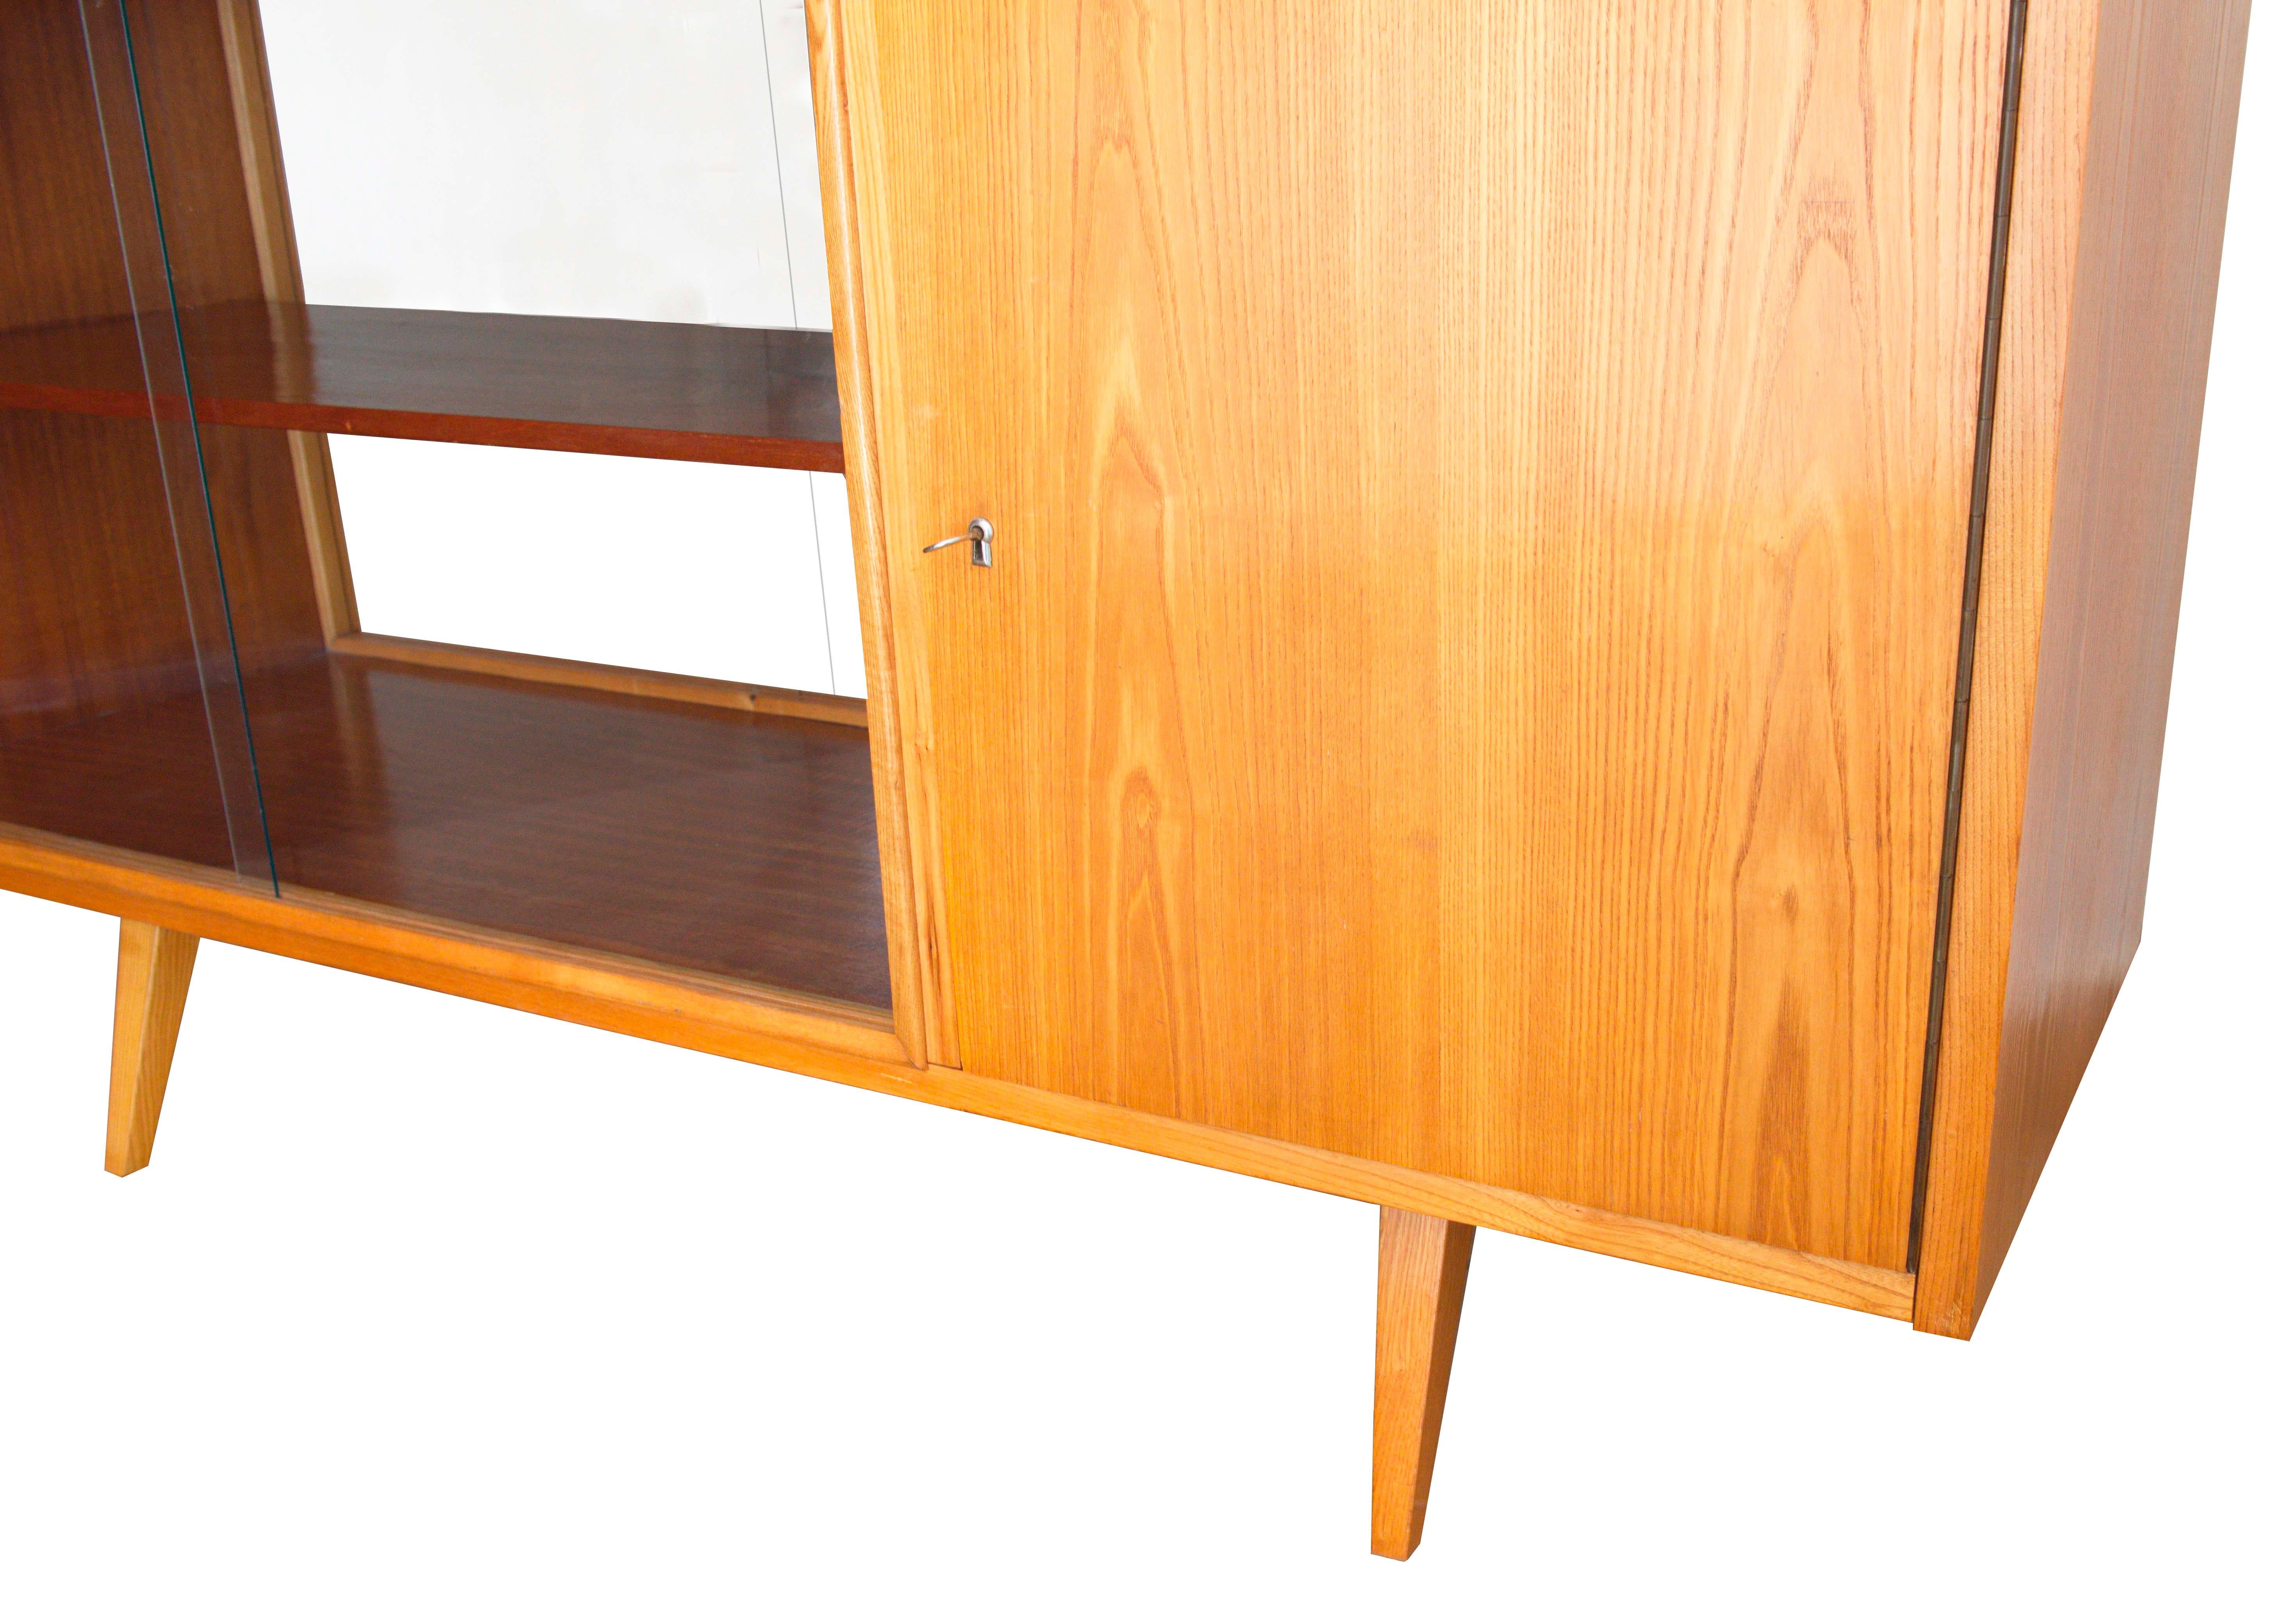 Czech 1960s Midcentury Ash Sideboard with Glass Sliding Doors by Frantisek Jirak For Sale